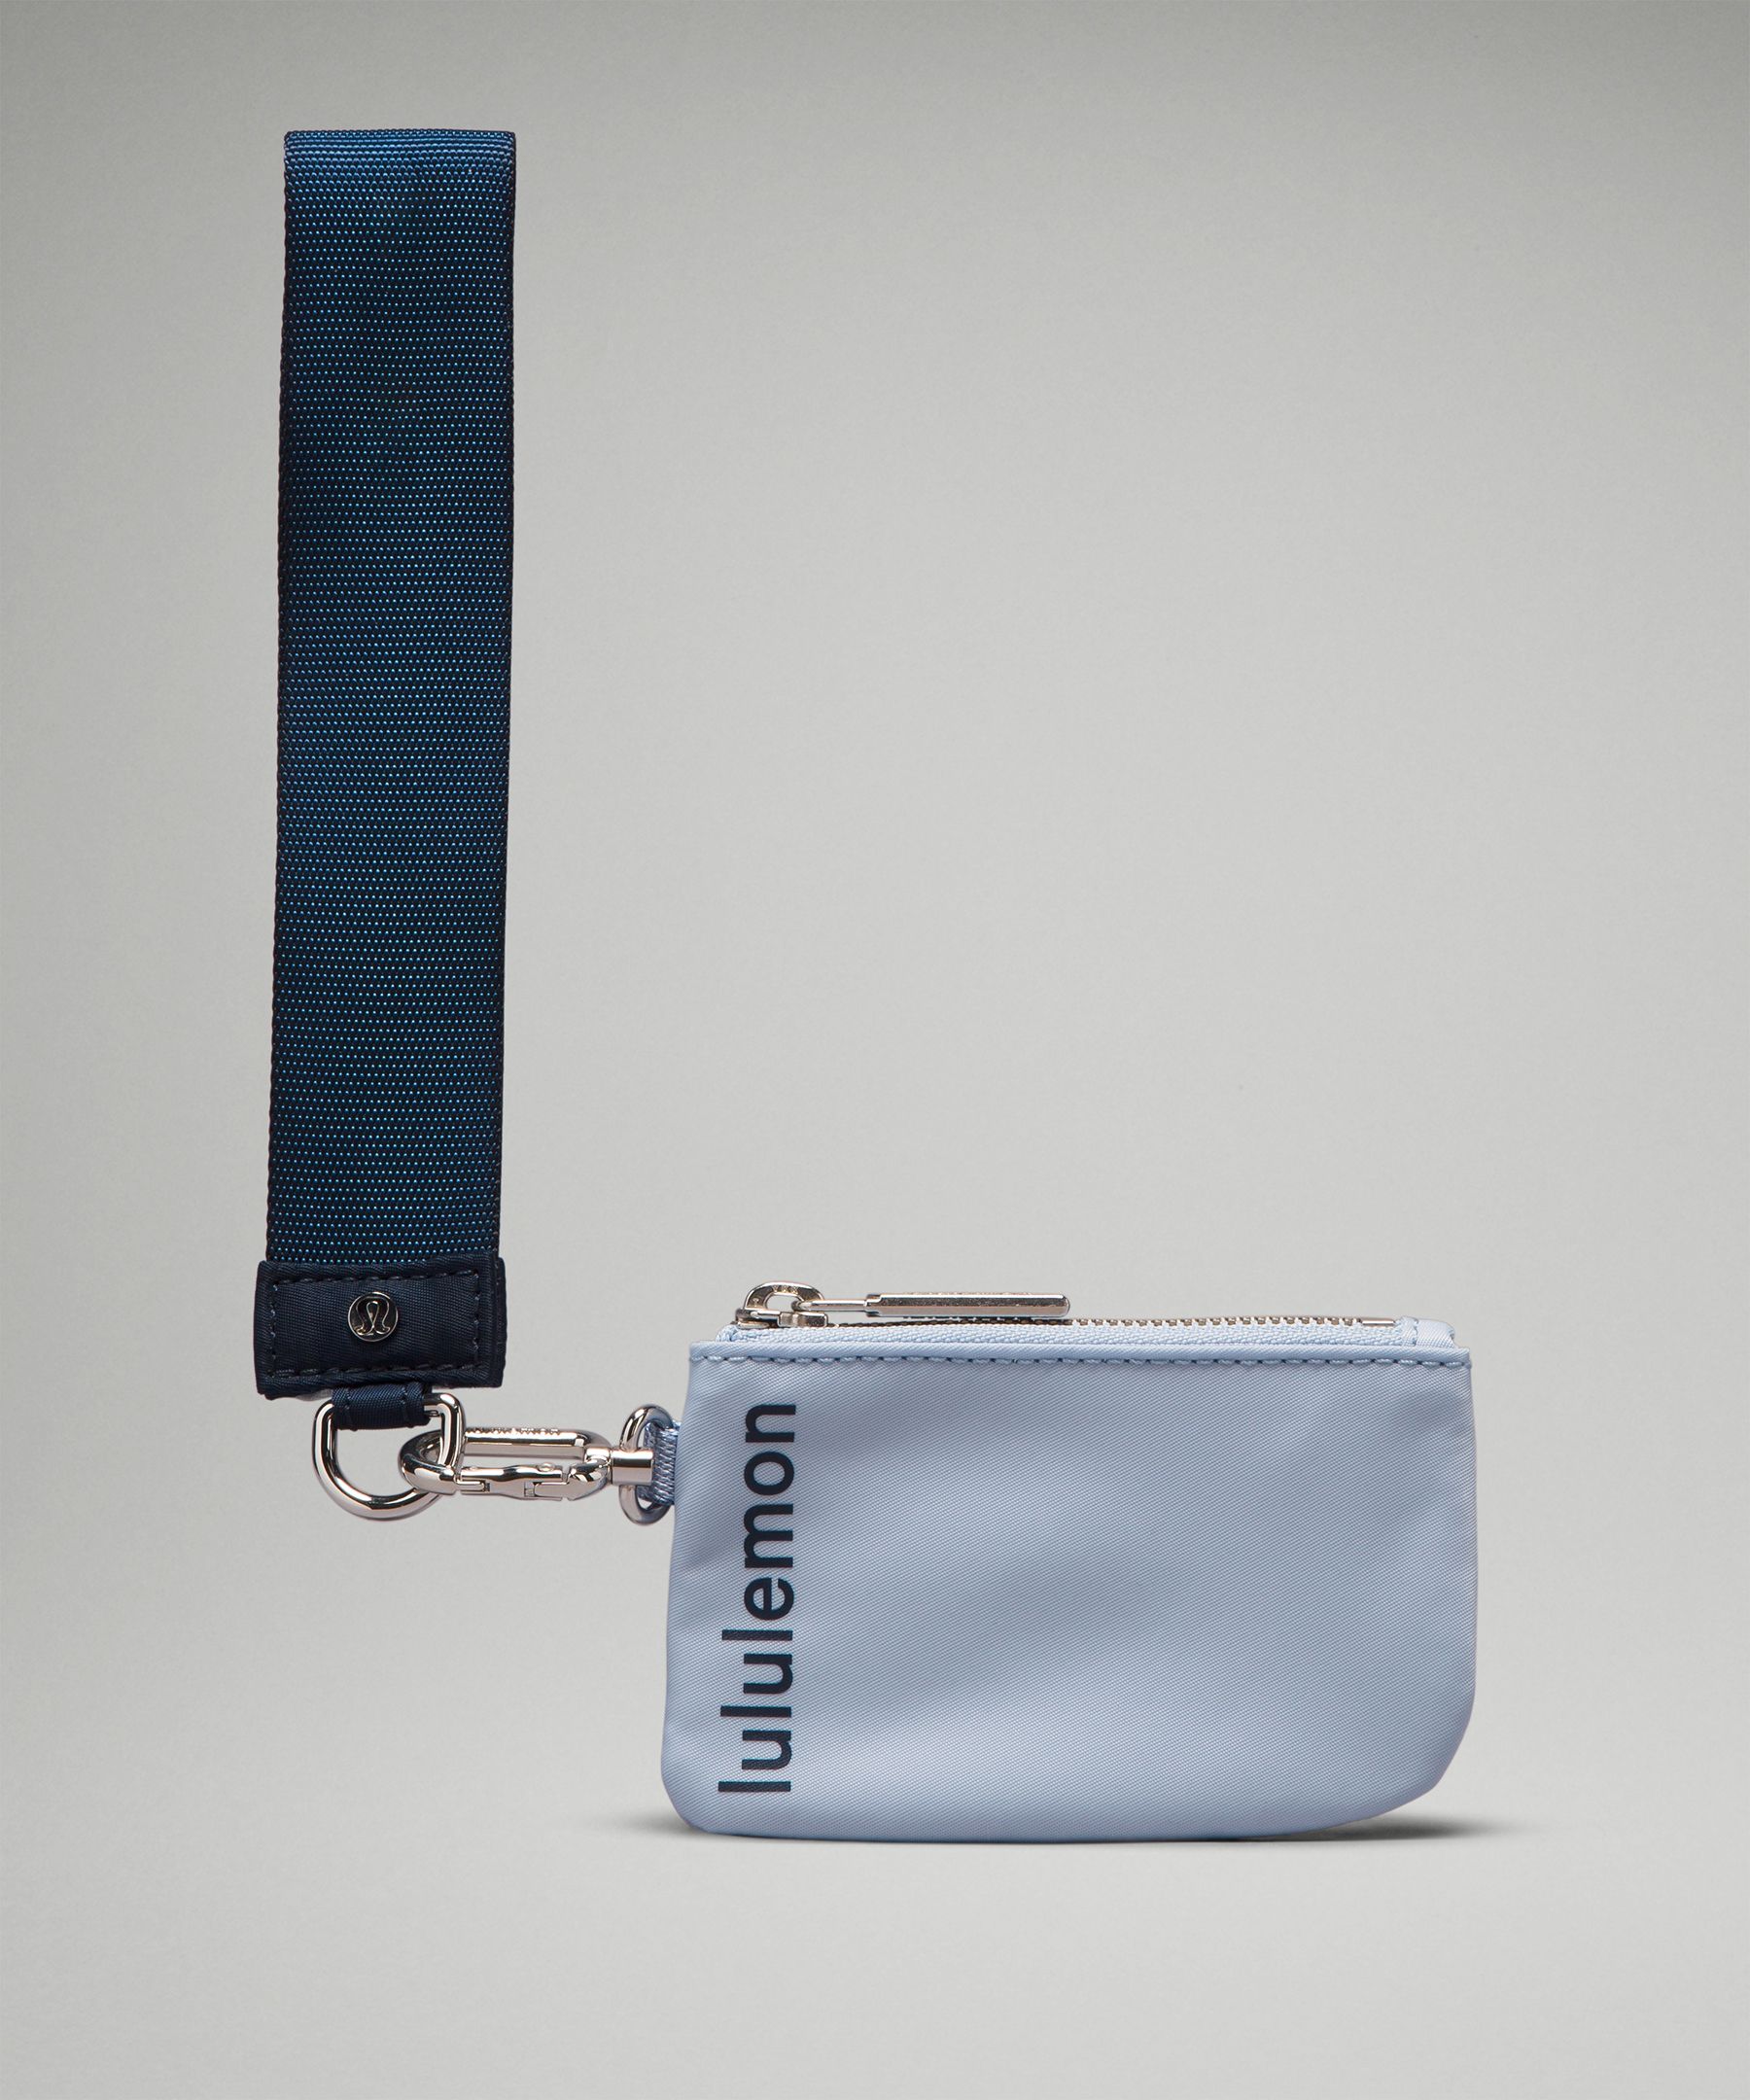 Lululemon Holiday Collection❄️ Dual Pouch Wristlet in Black